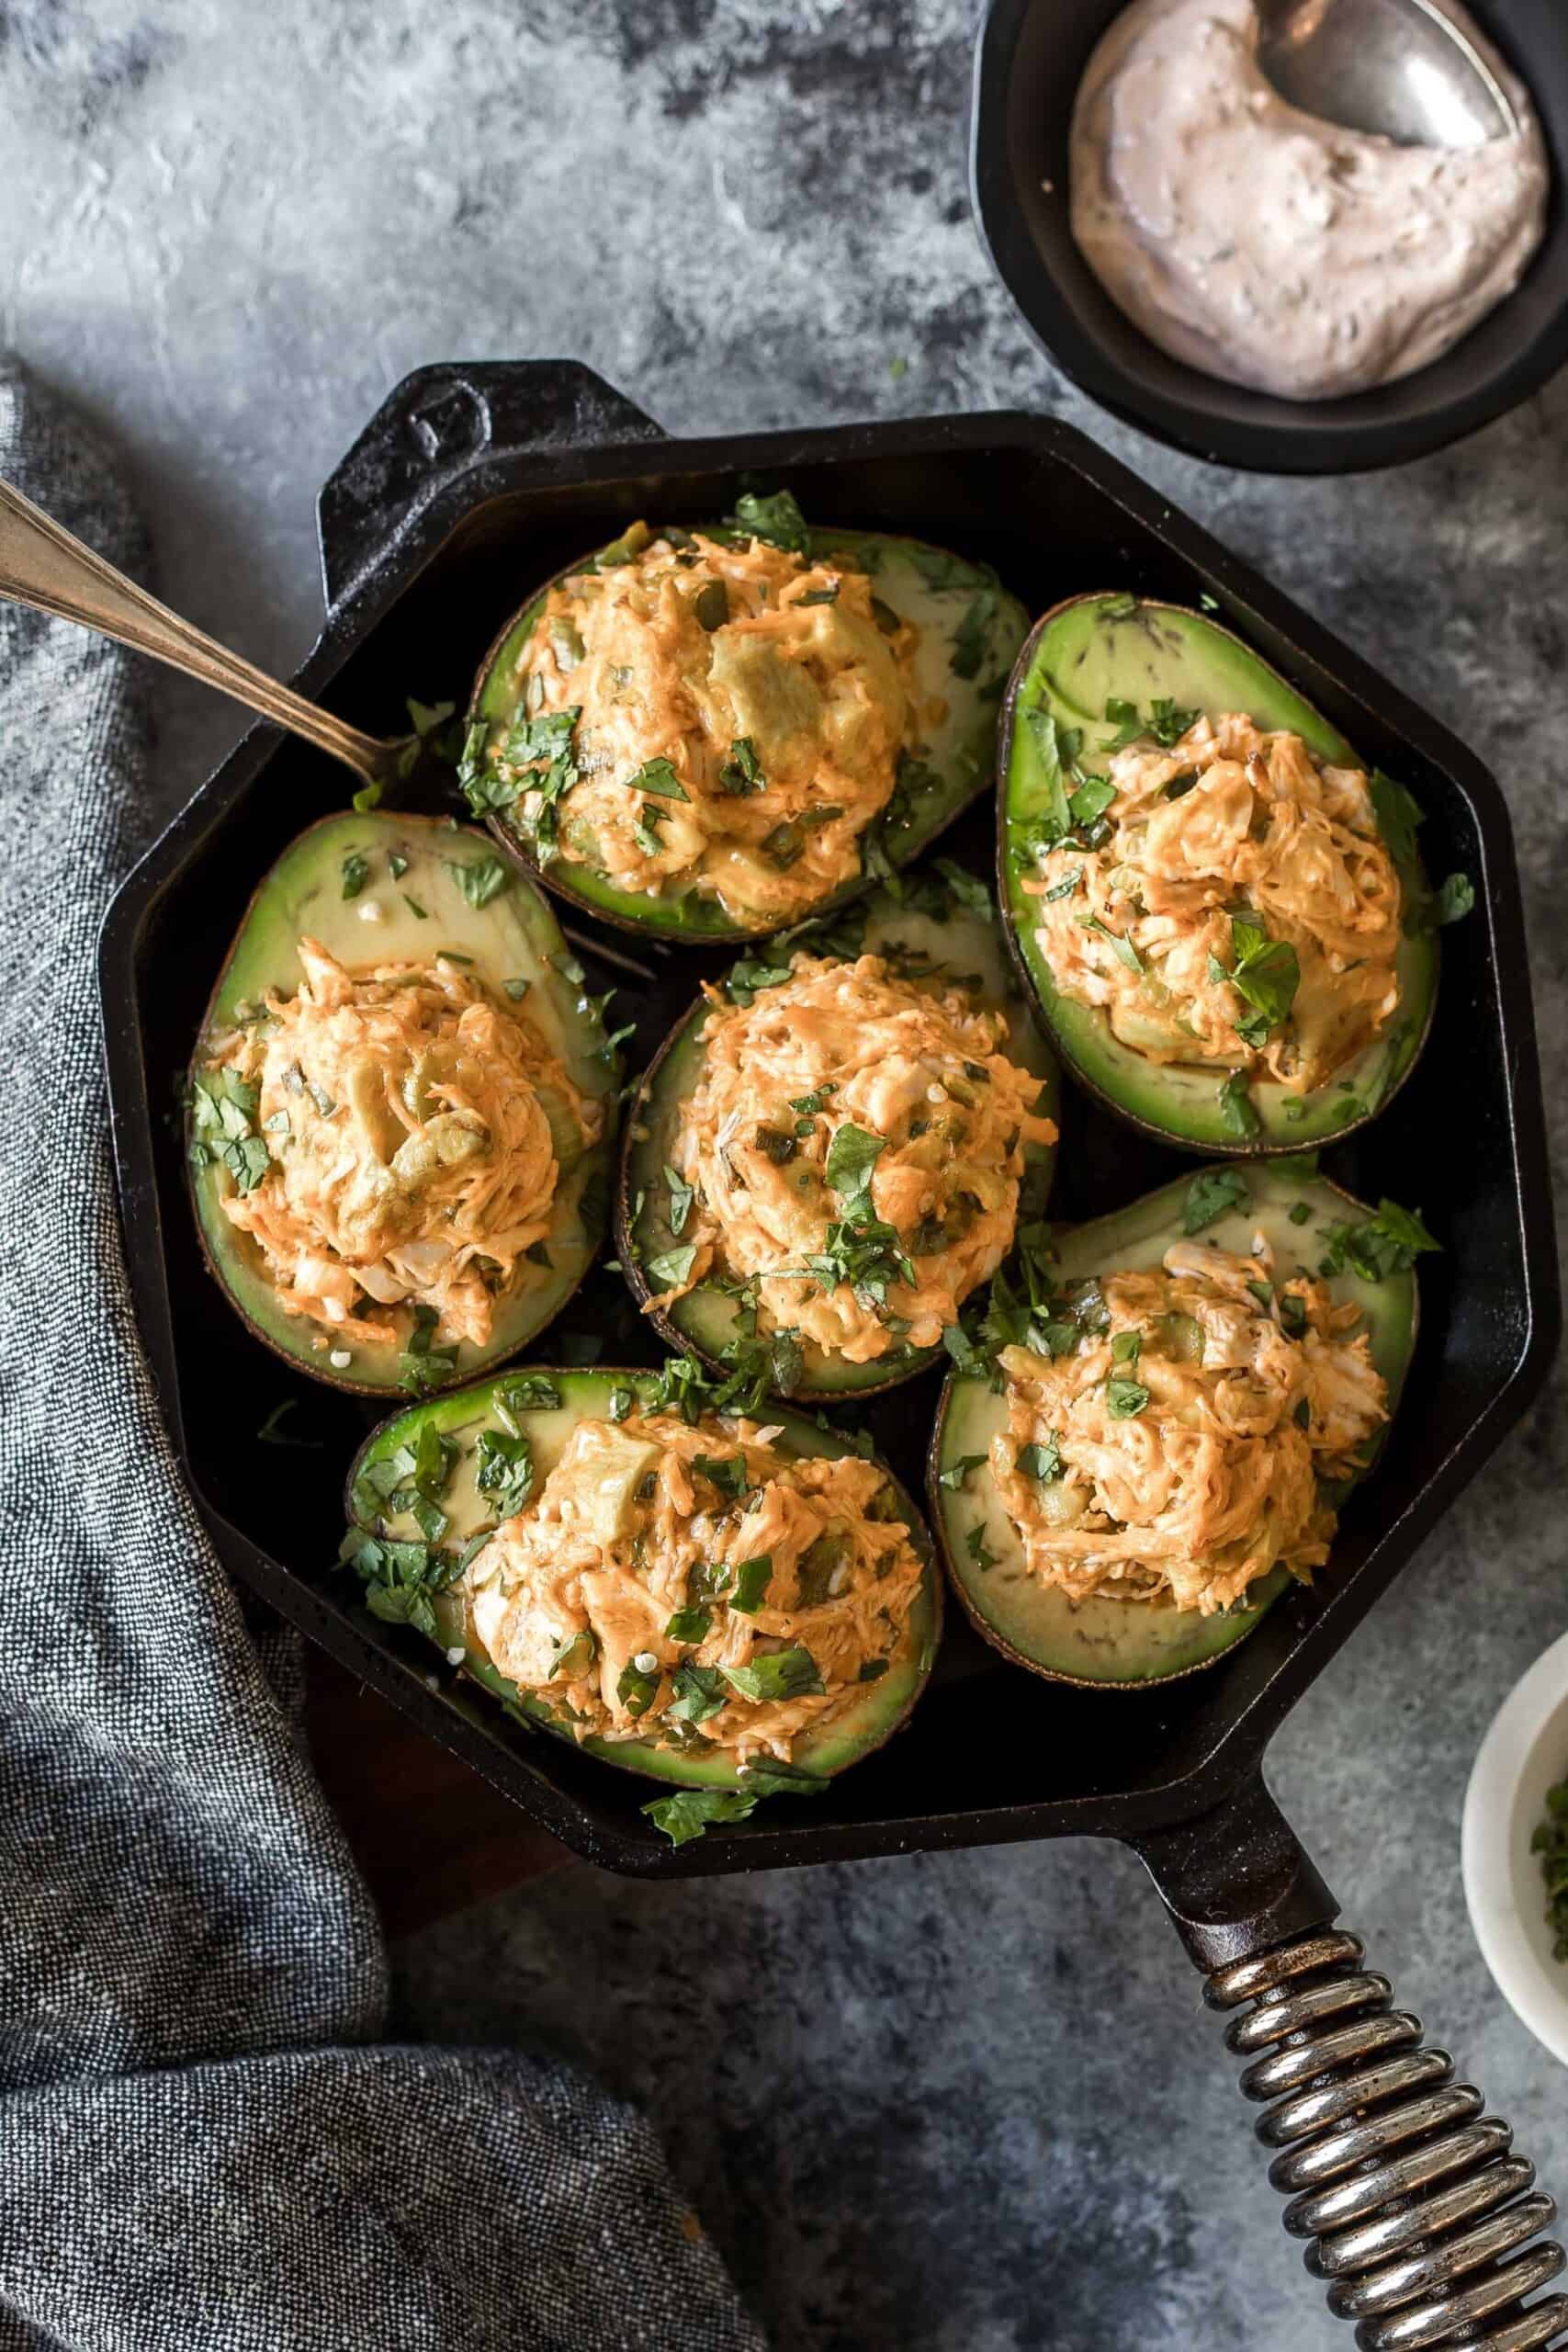 6 avocado halves filled with the cheesy buffalo chicken mixture arranged in a cast iron skillet